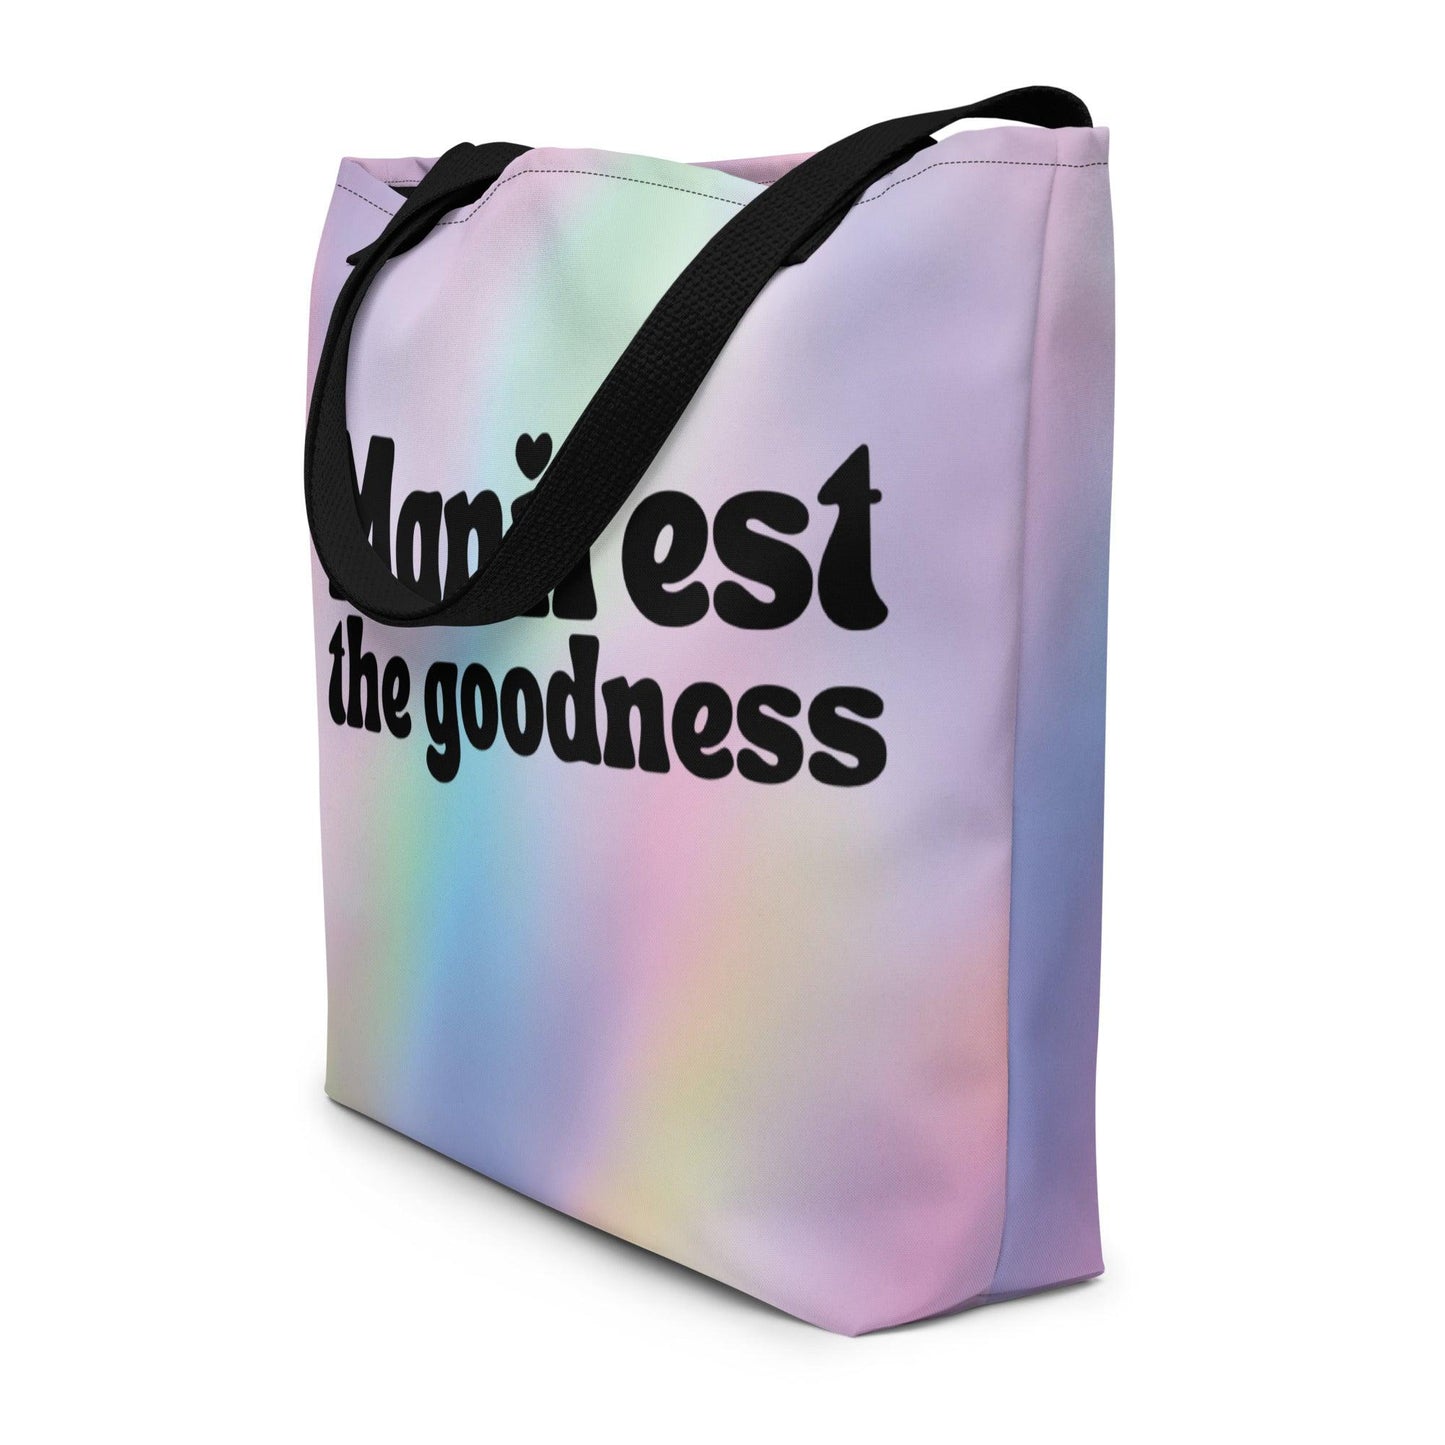 Manifest the Goodness Large Tote Bag